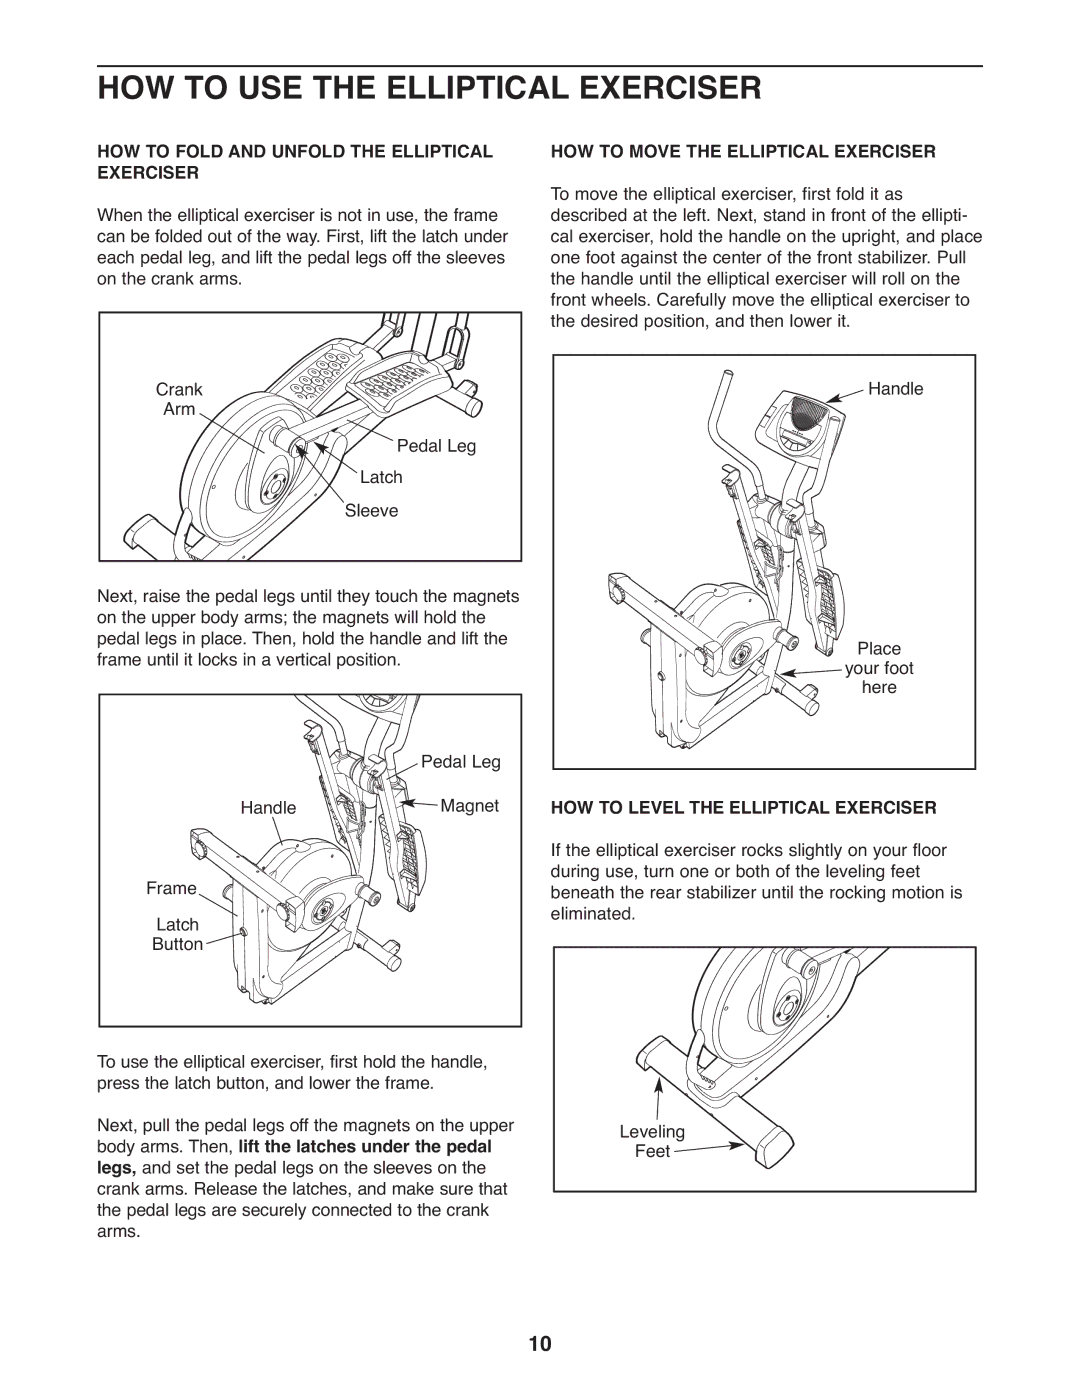 ProForm 831.28544.2 user manual HOW to USE the Elliptical Exerciser, HOW to Fold and Unfold the Elliptical Exerciser 